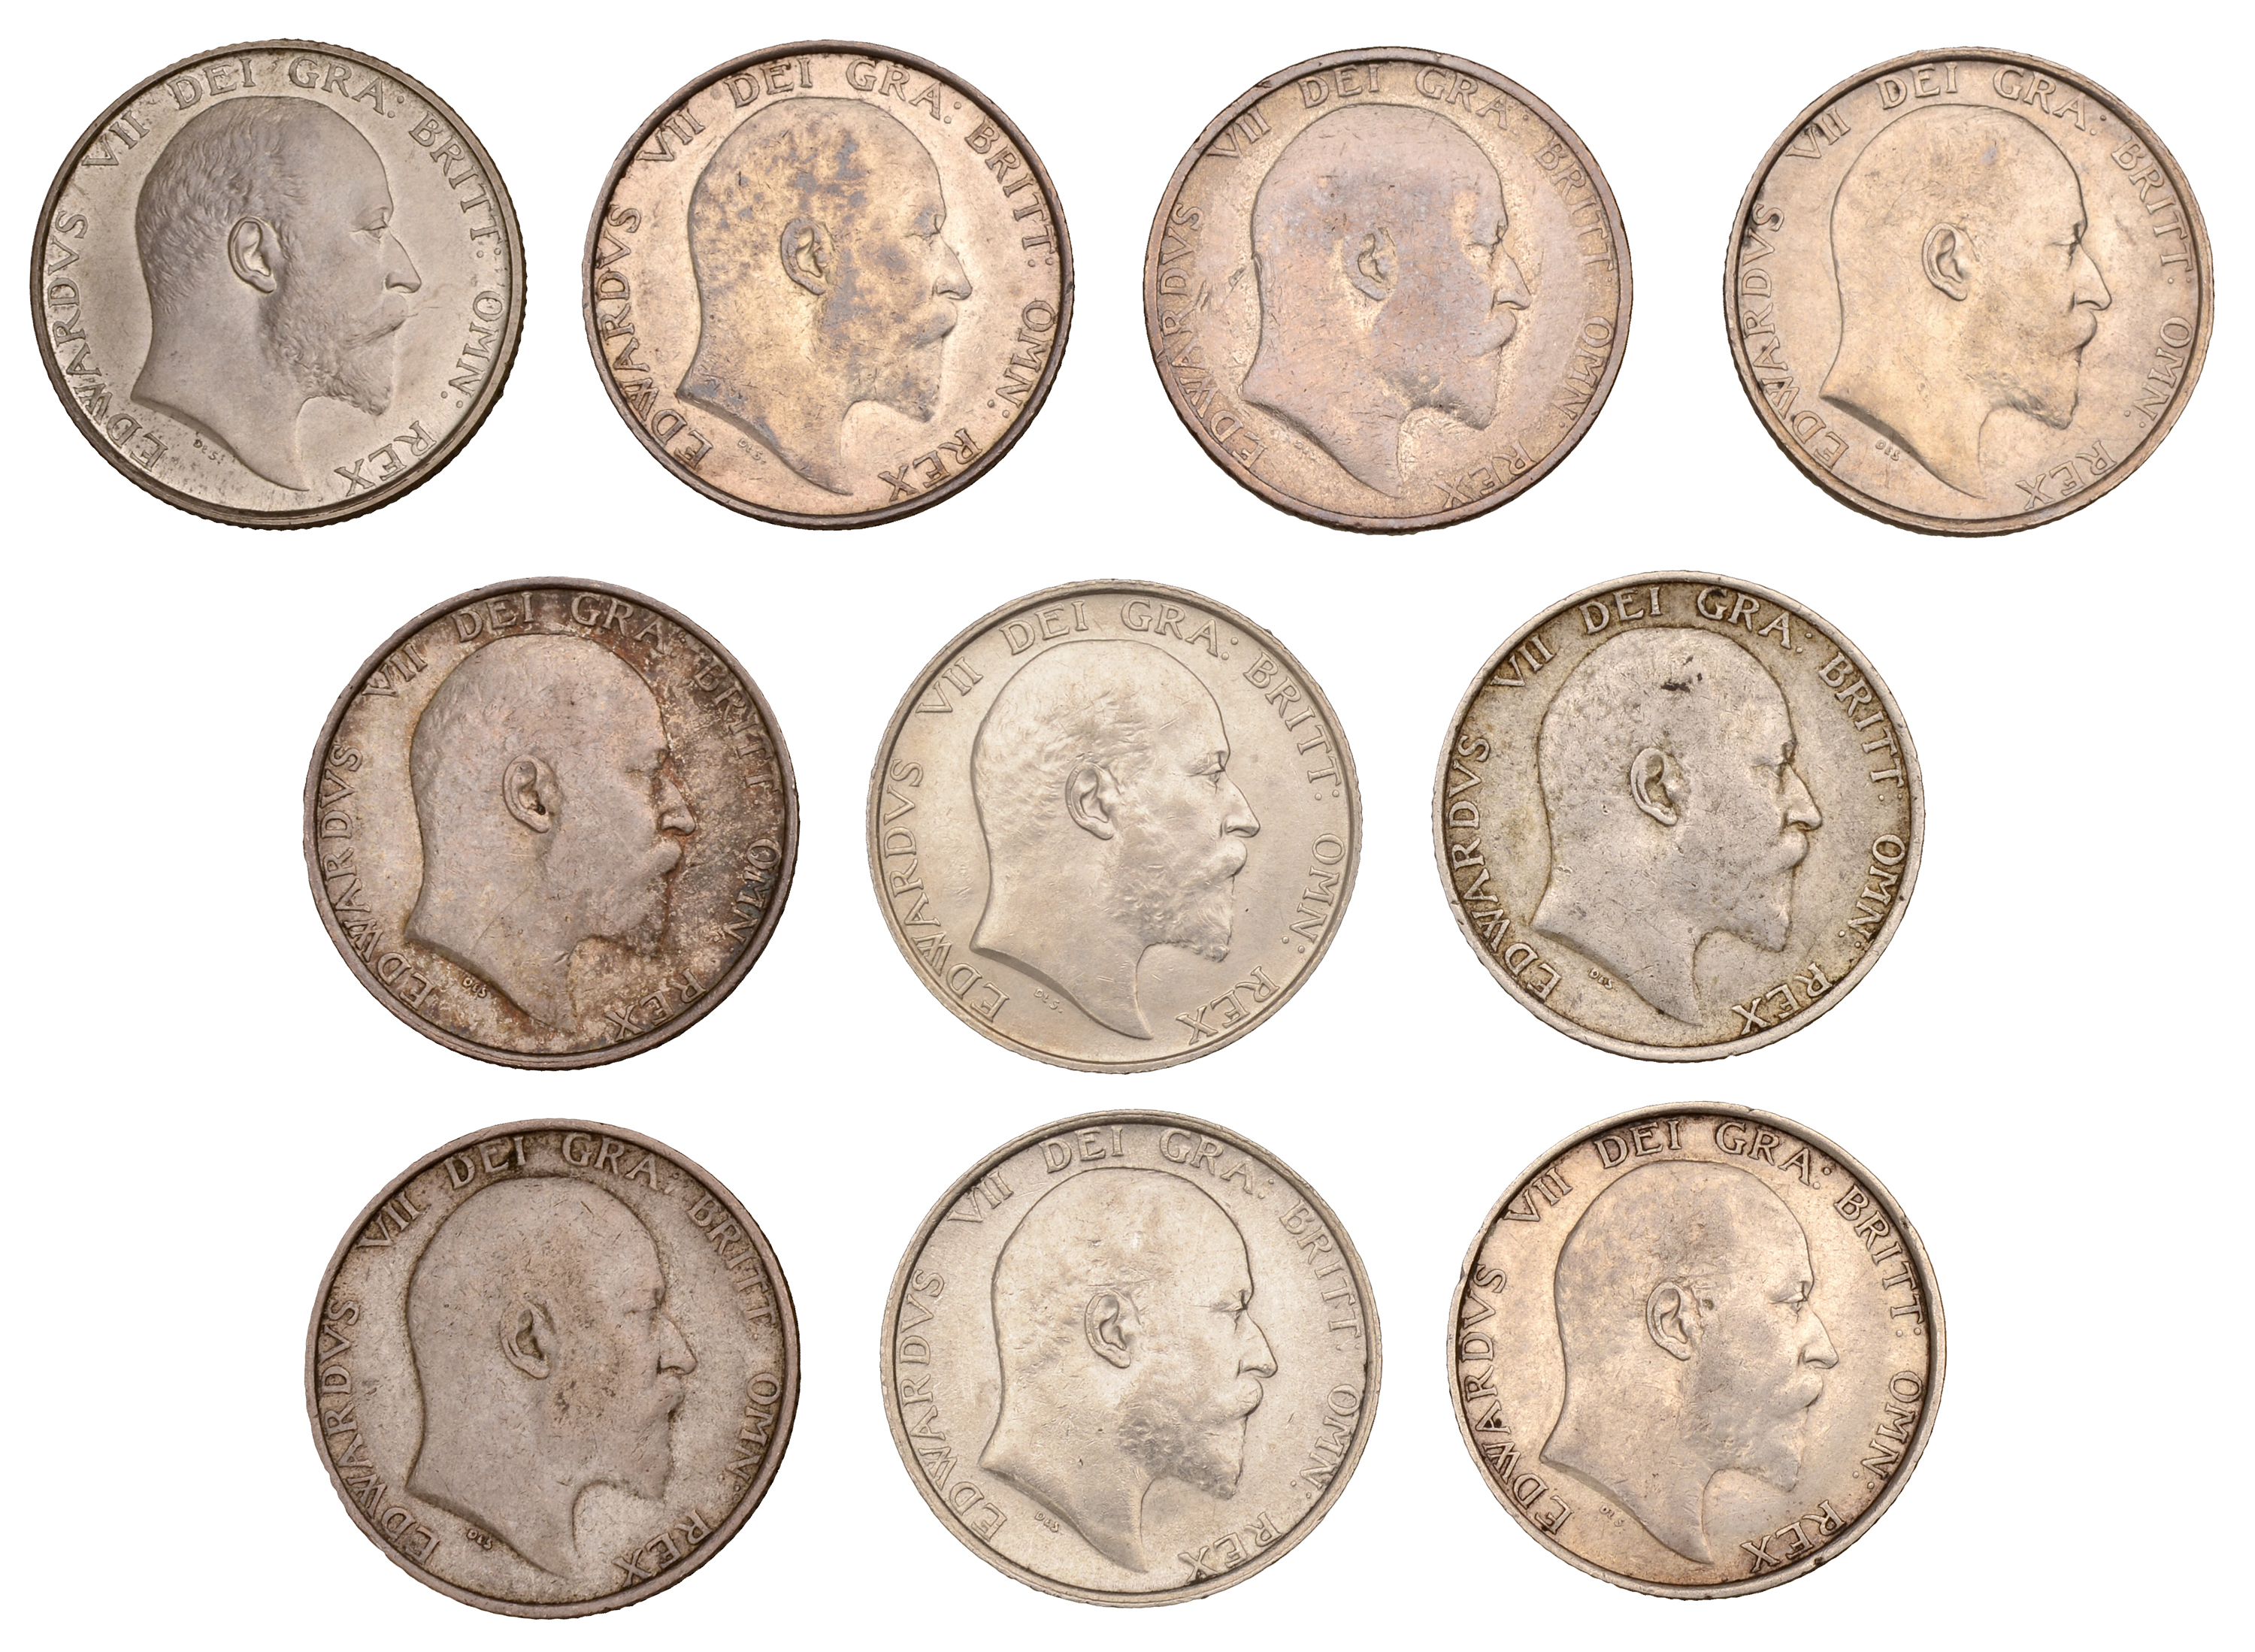 Edward VII, Shillings (10), 1902 (2, Proof and currency), 1903-1910 inclusive [10]. 1905, 19...